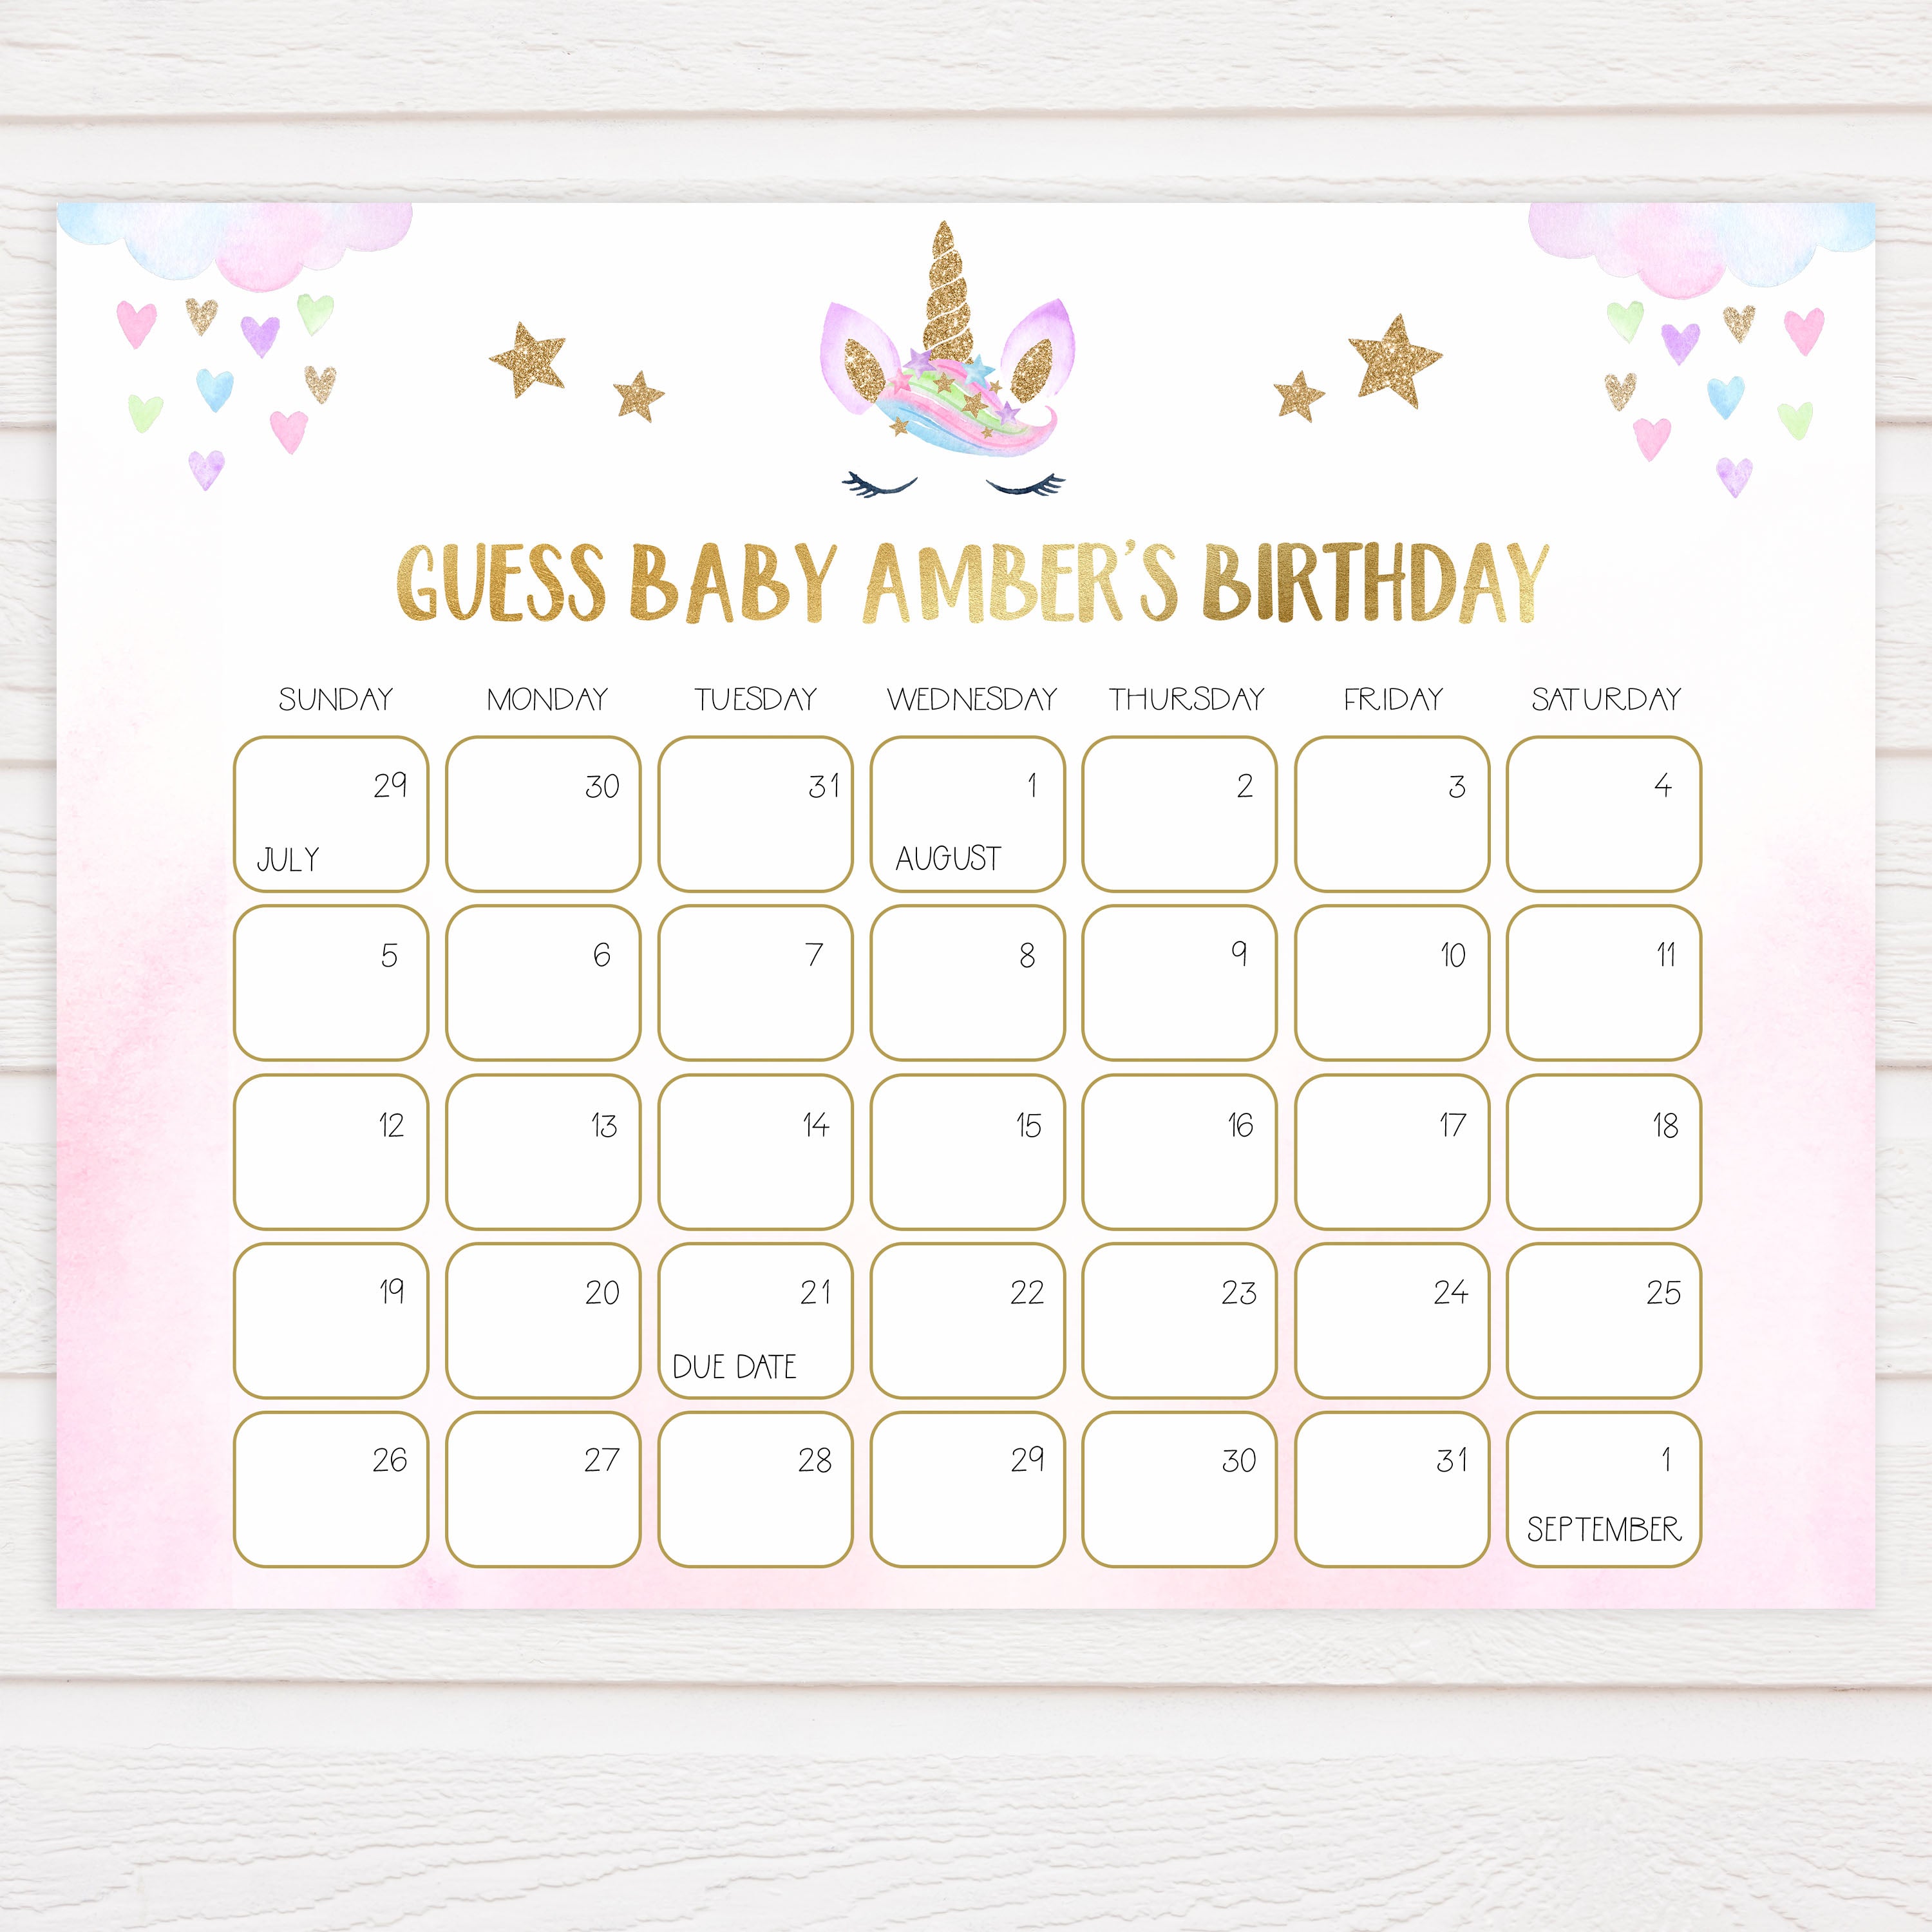 guess the baby birthday game, Printable baby shower games, unicorn baby games, baby shower games, fun baby shower ideas, top baby shower ideas, unicorn baby shower, baby shower games, fun unicorn baby shower ideas